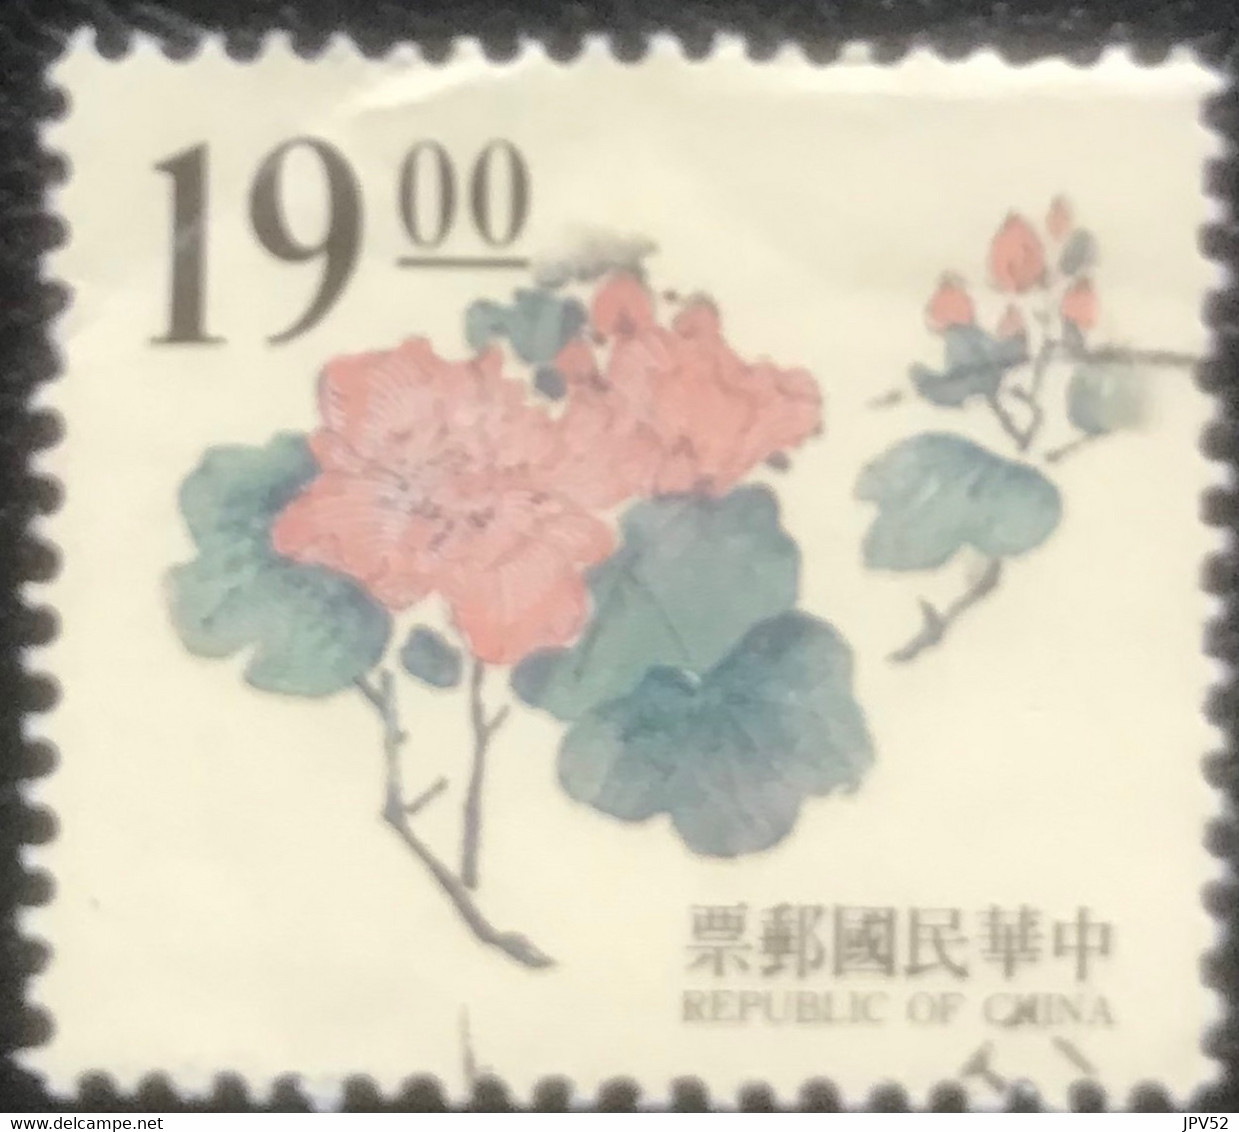 Republic Of China - Taiwan - C6/11 - (°)used - 1995 - Michel 2219 - Oude Chinese Gravures - Usati